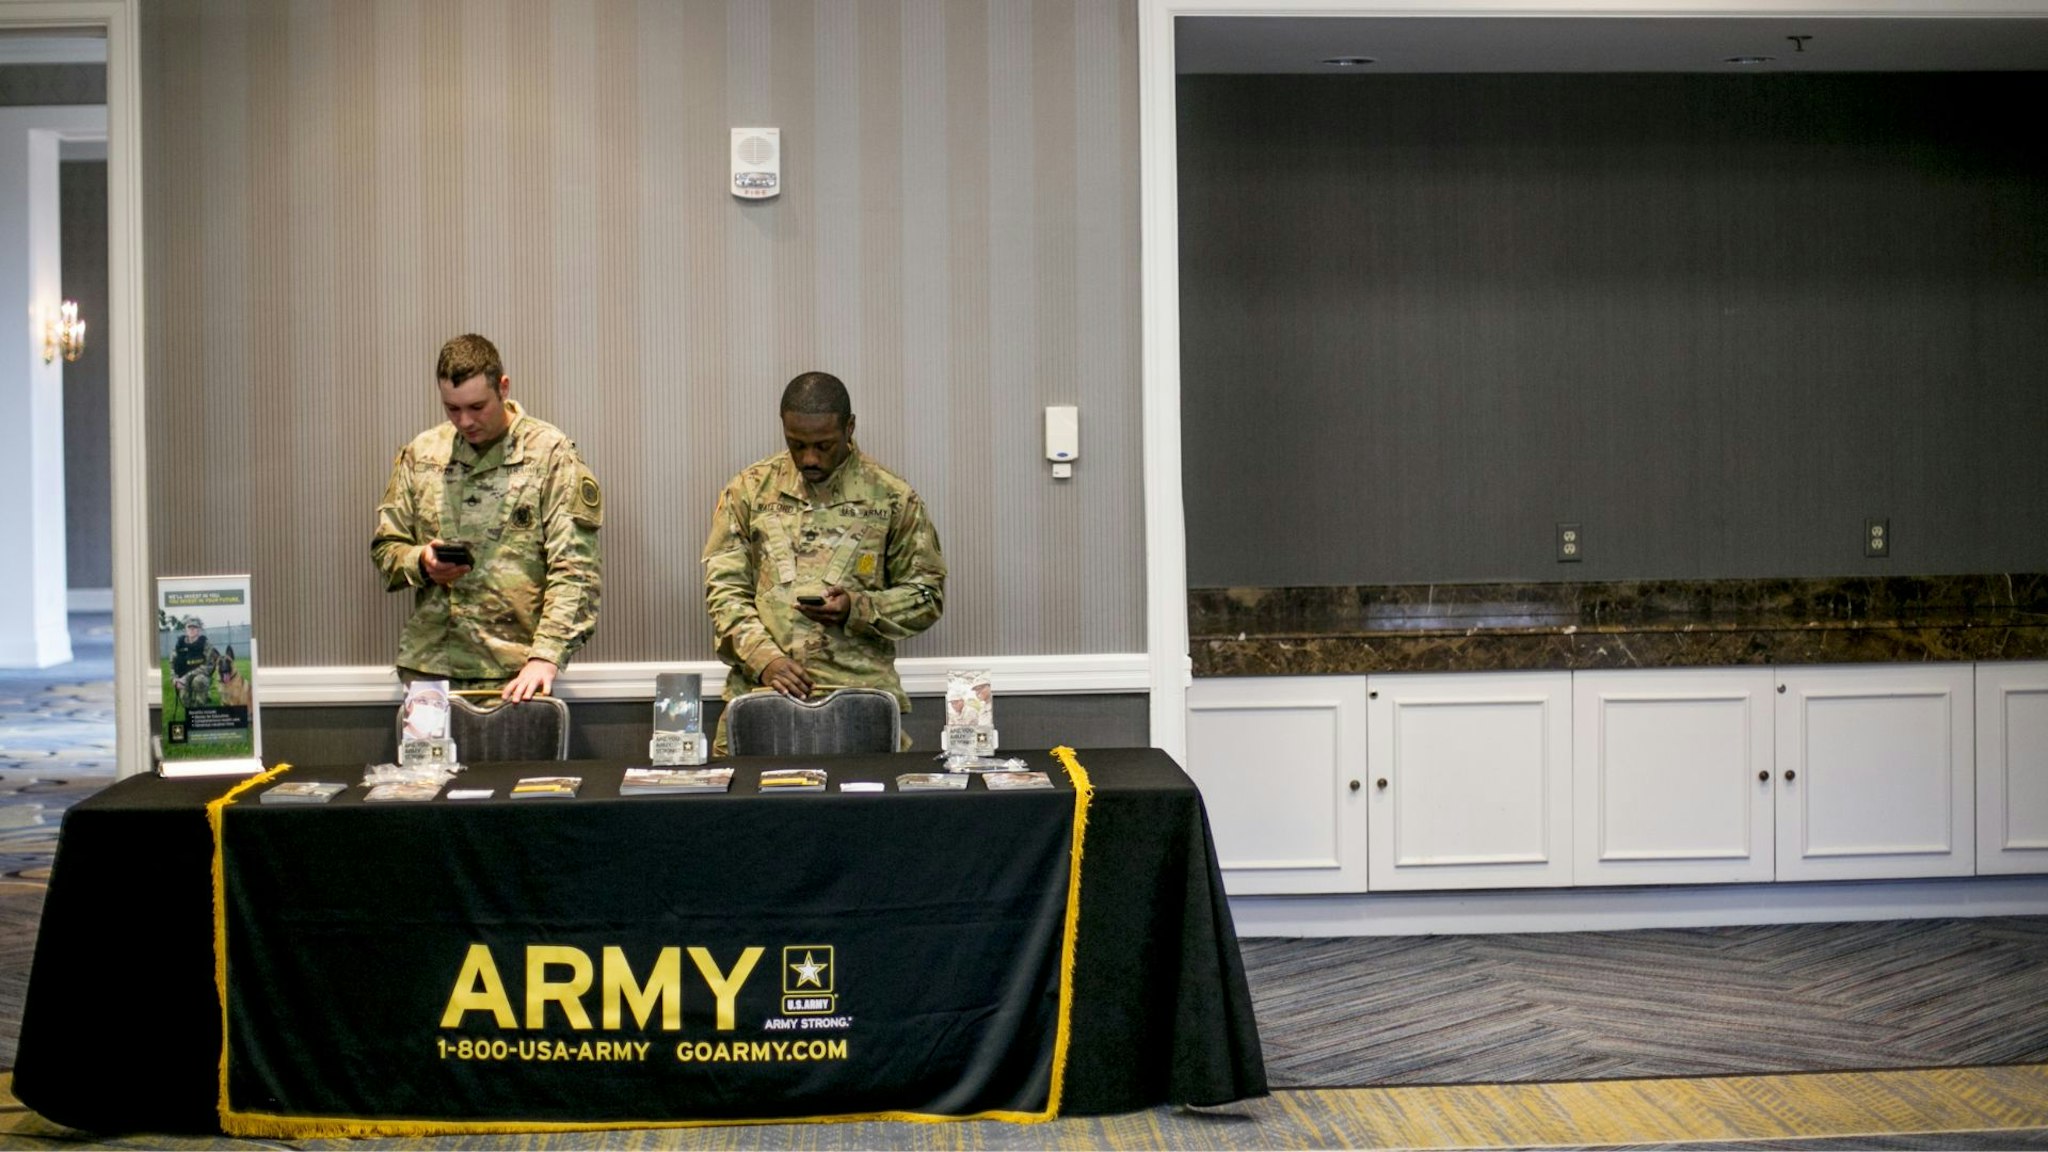 U.S. Army recruiters view mobile devices during a National Career Fairs event in Dearborn, Michigan, U.S., on Tuesday, Dec. 5, 2017.